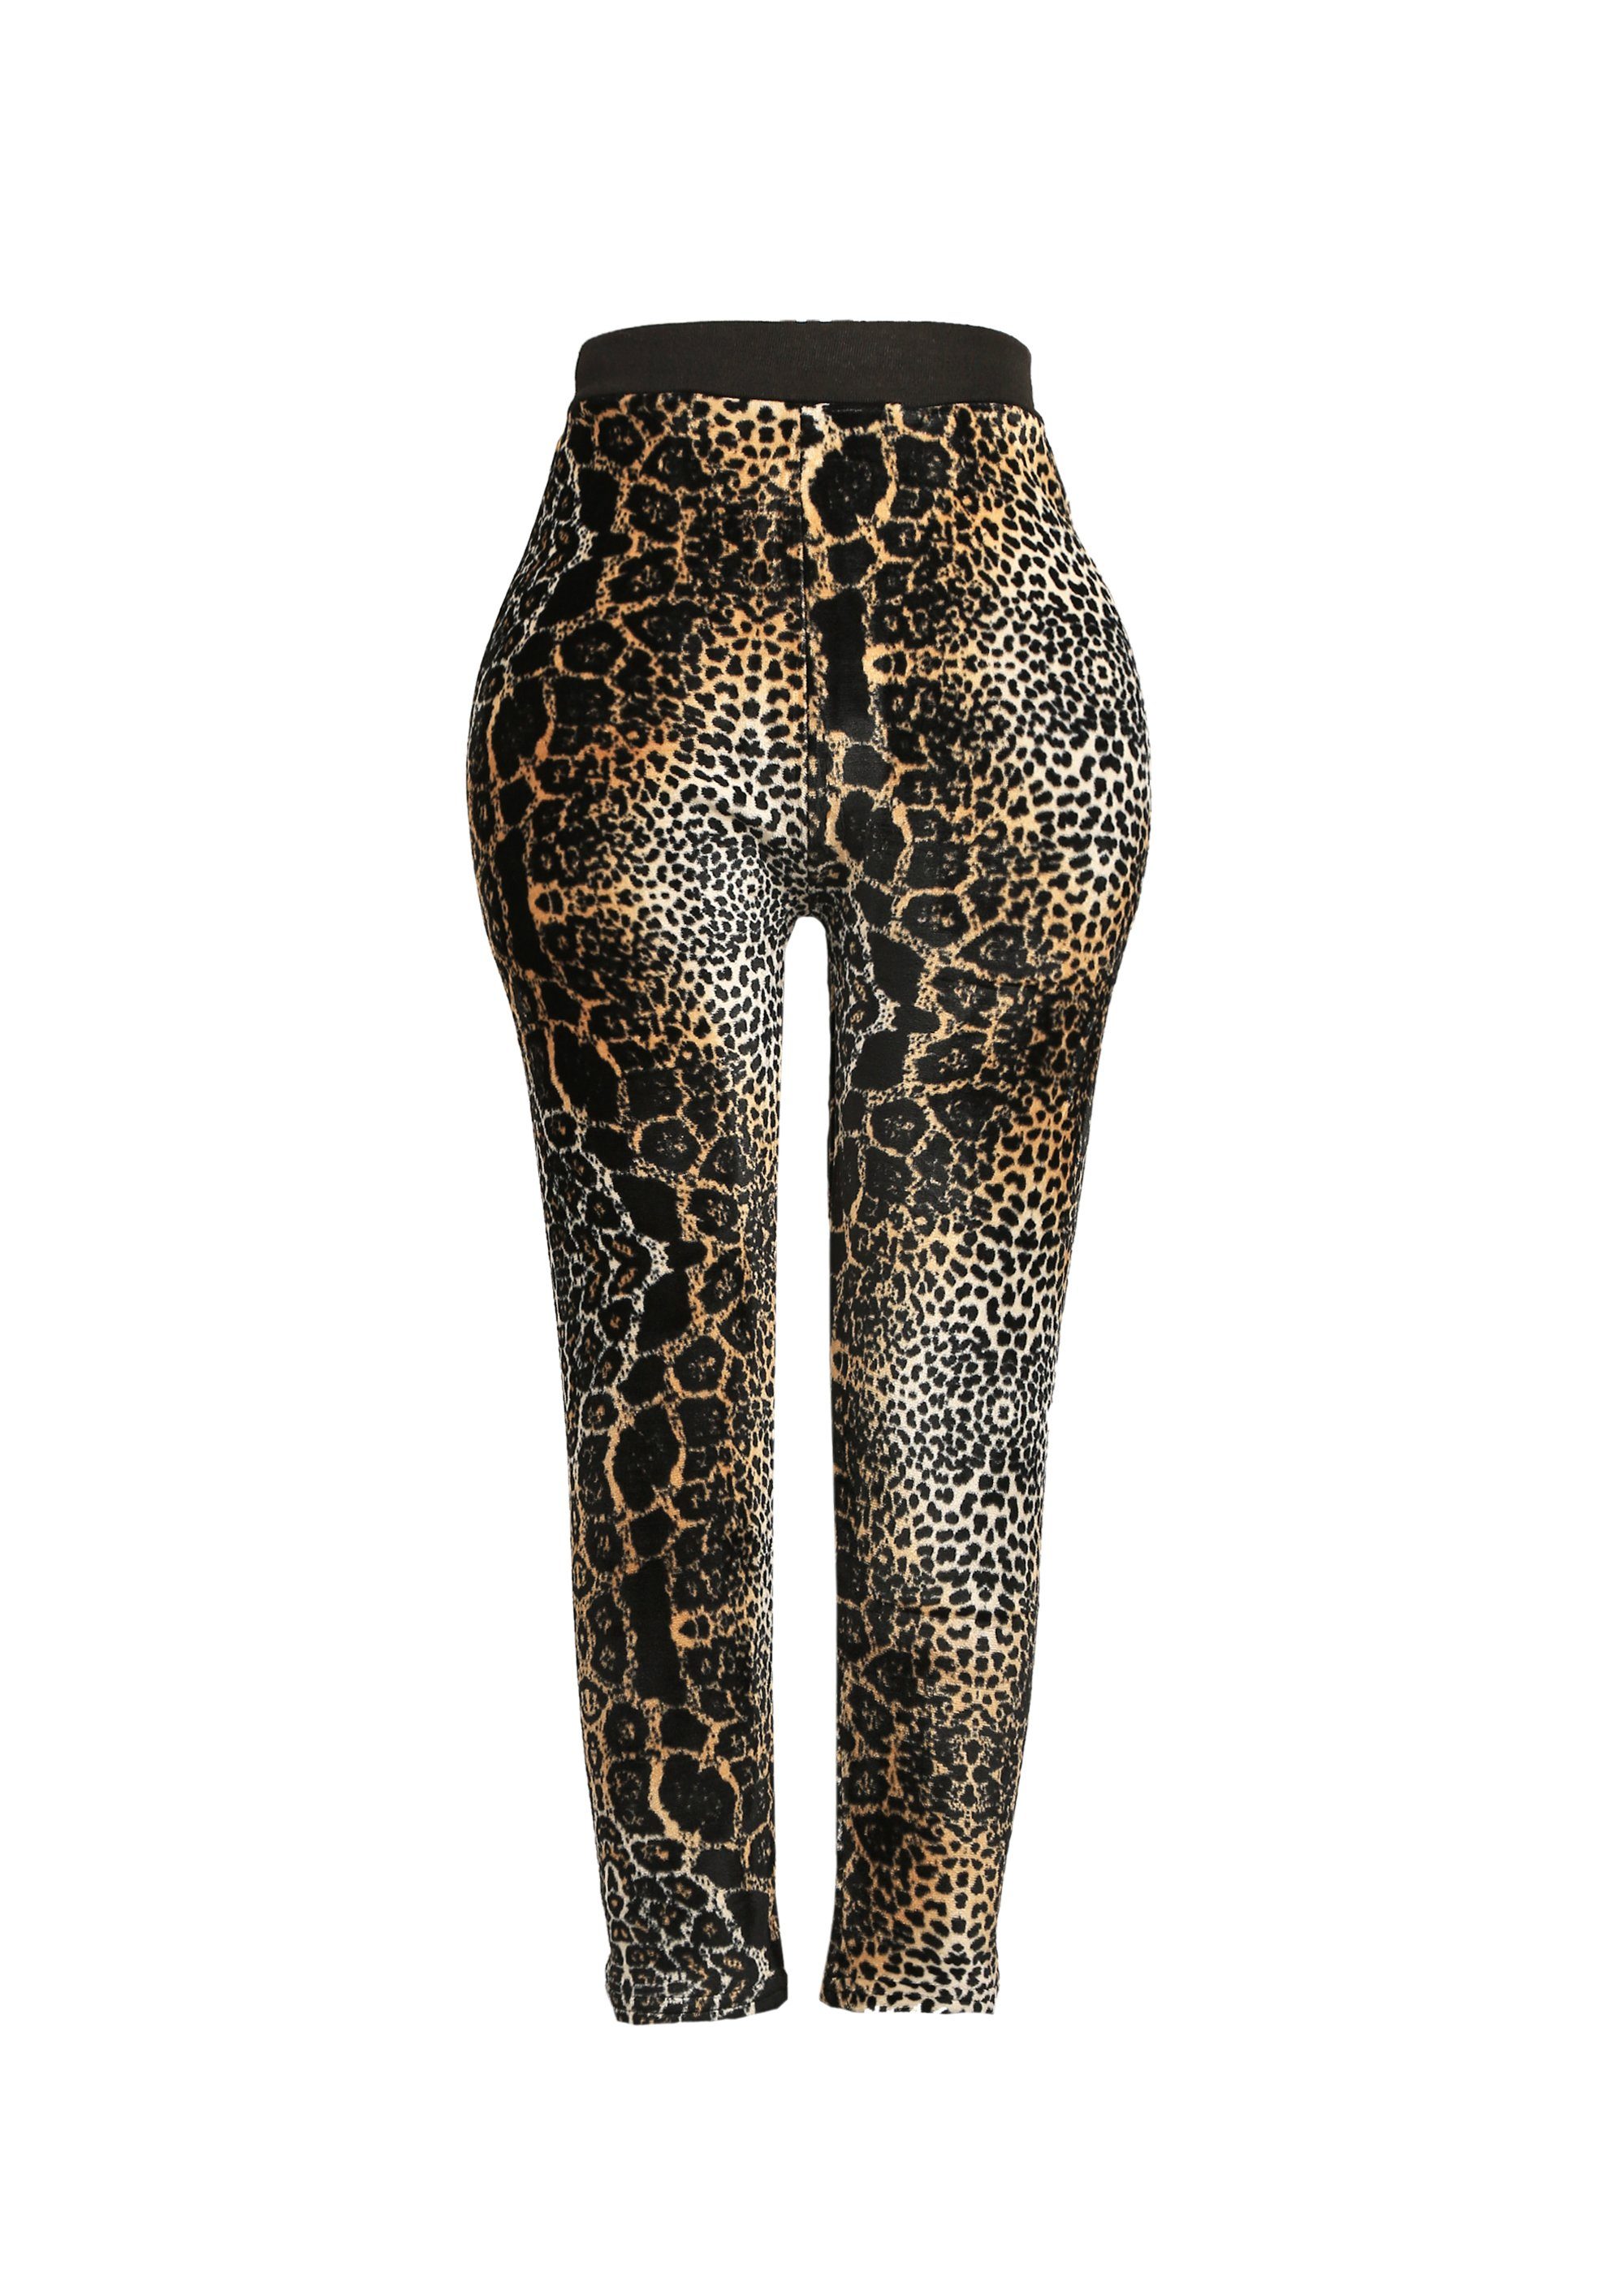 mit Leggings Trends Thermo-Funktion Family wärmender